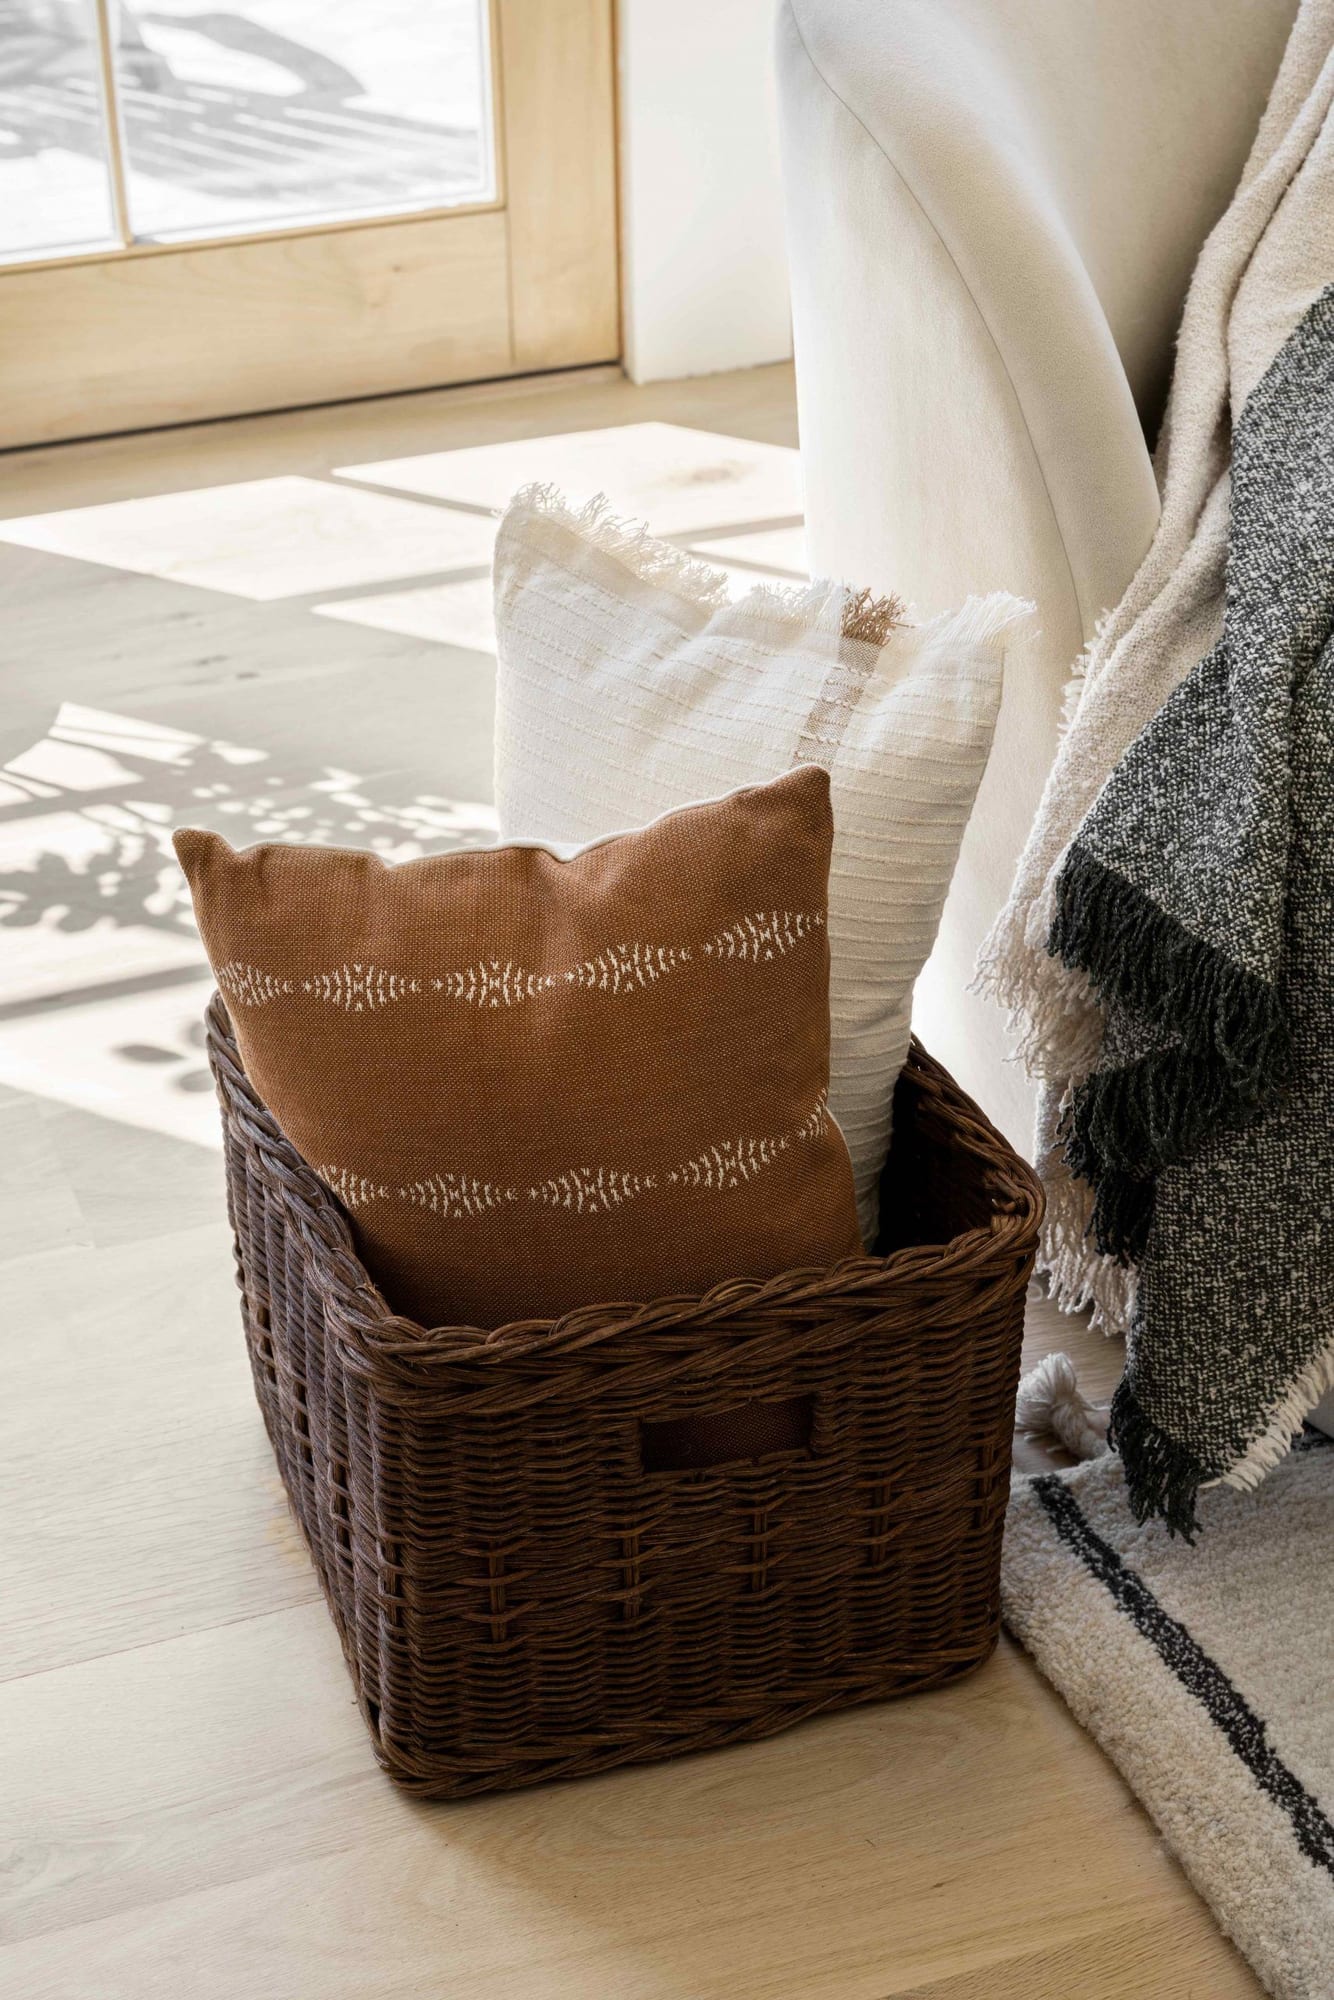 Rattan Cube Basket featured in Target's fall 2022 